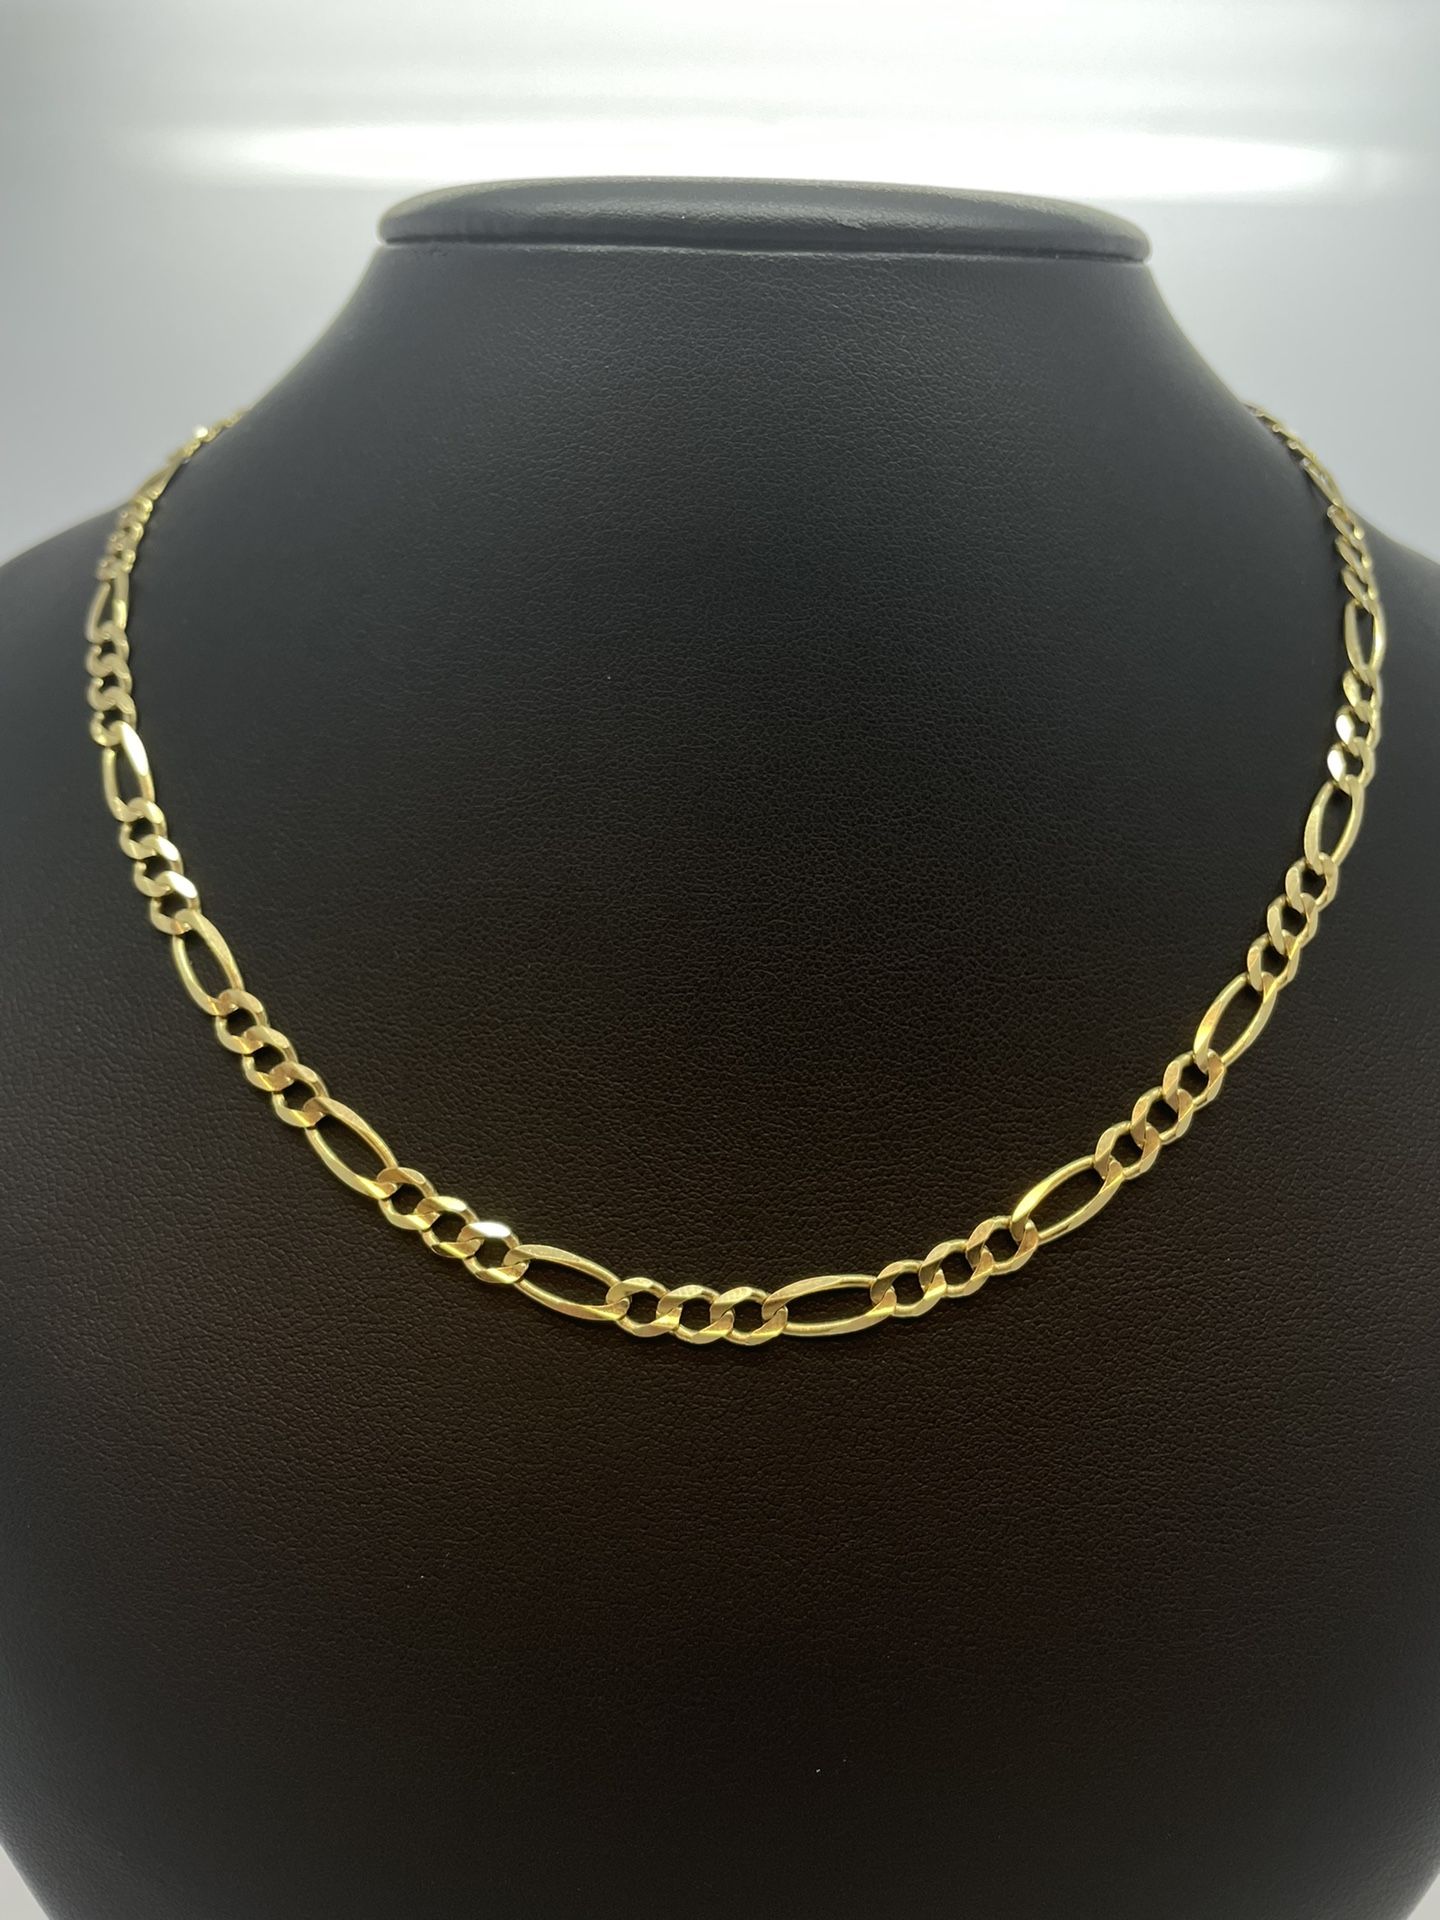 Gold Chain Figaro 14K Solid Gold New 